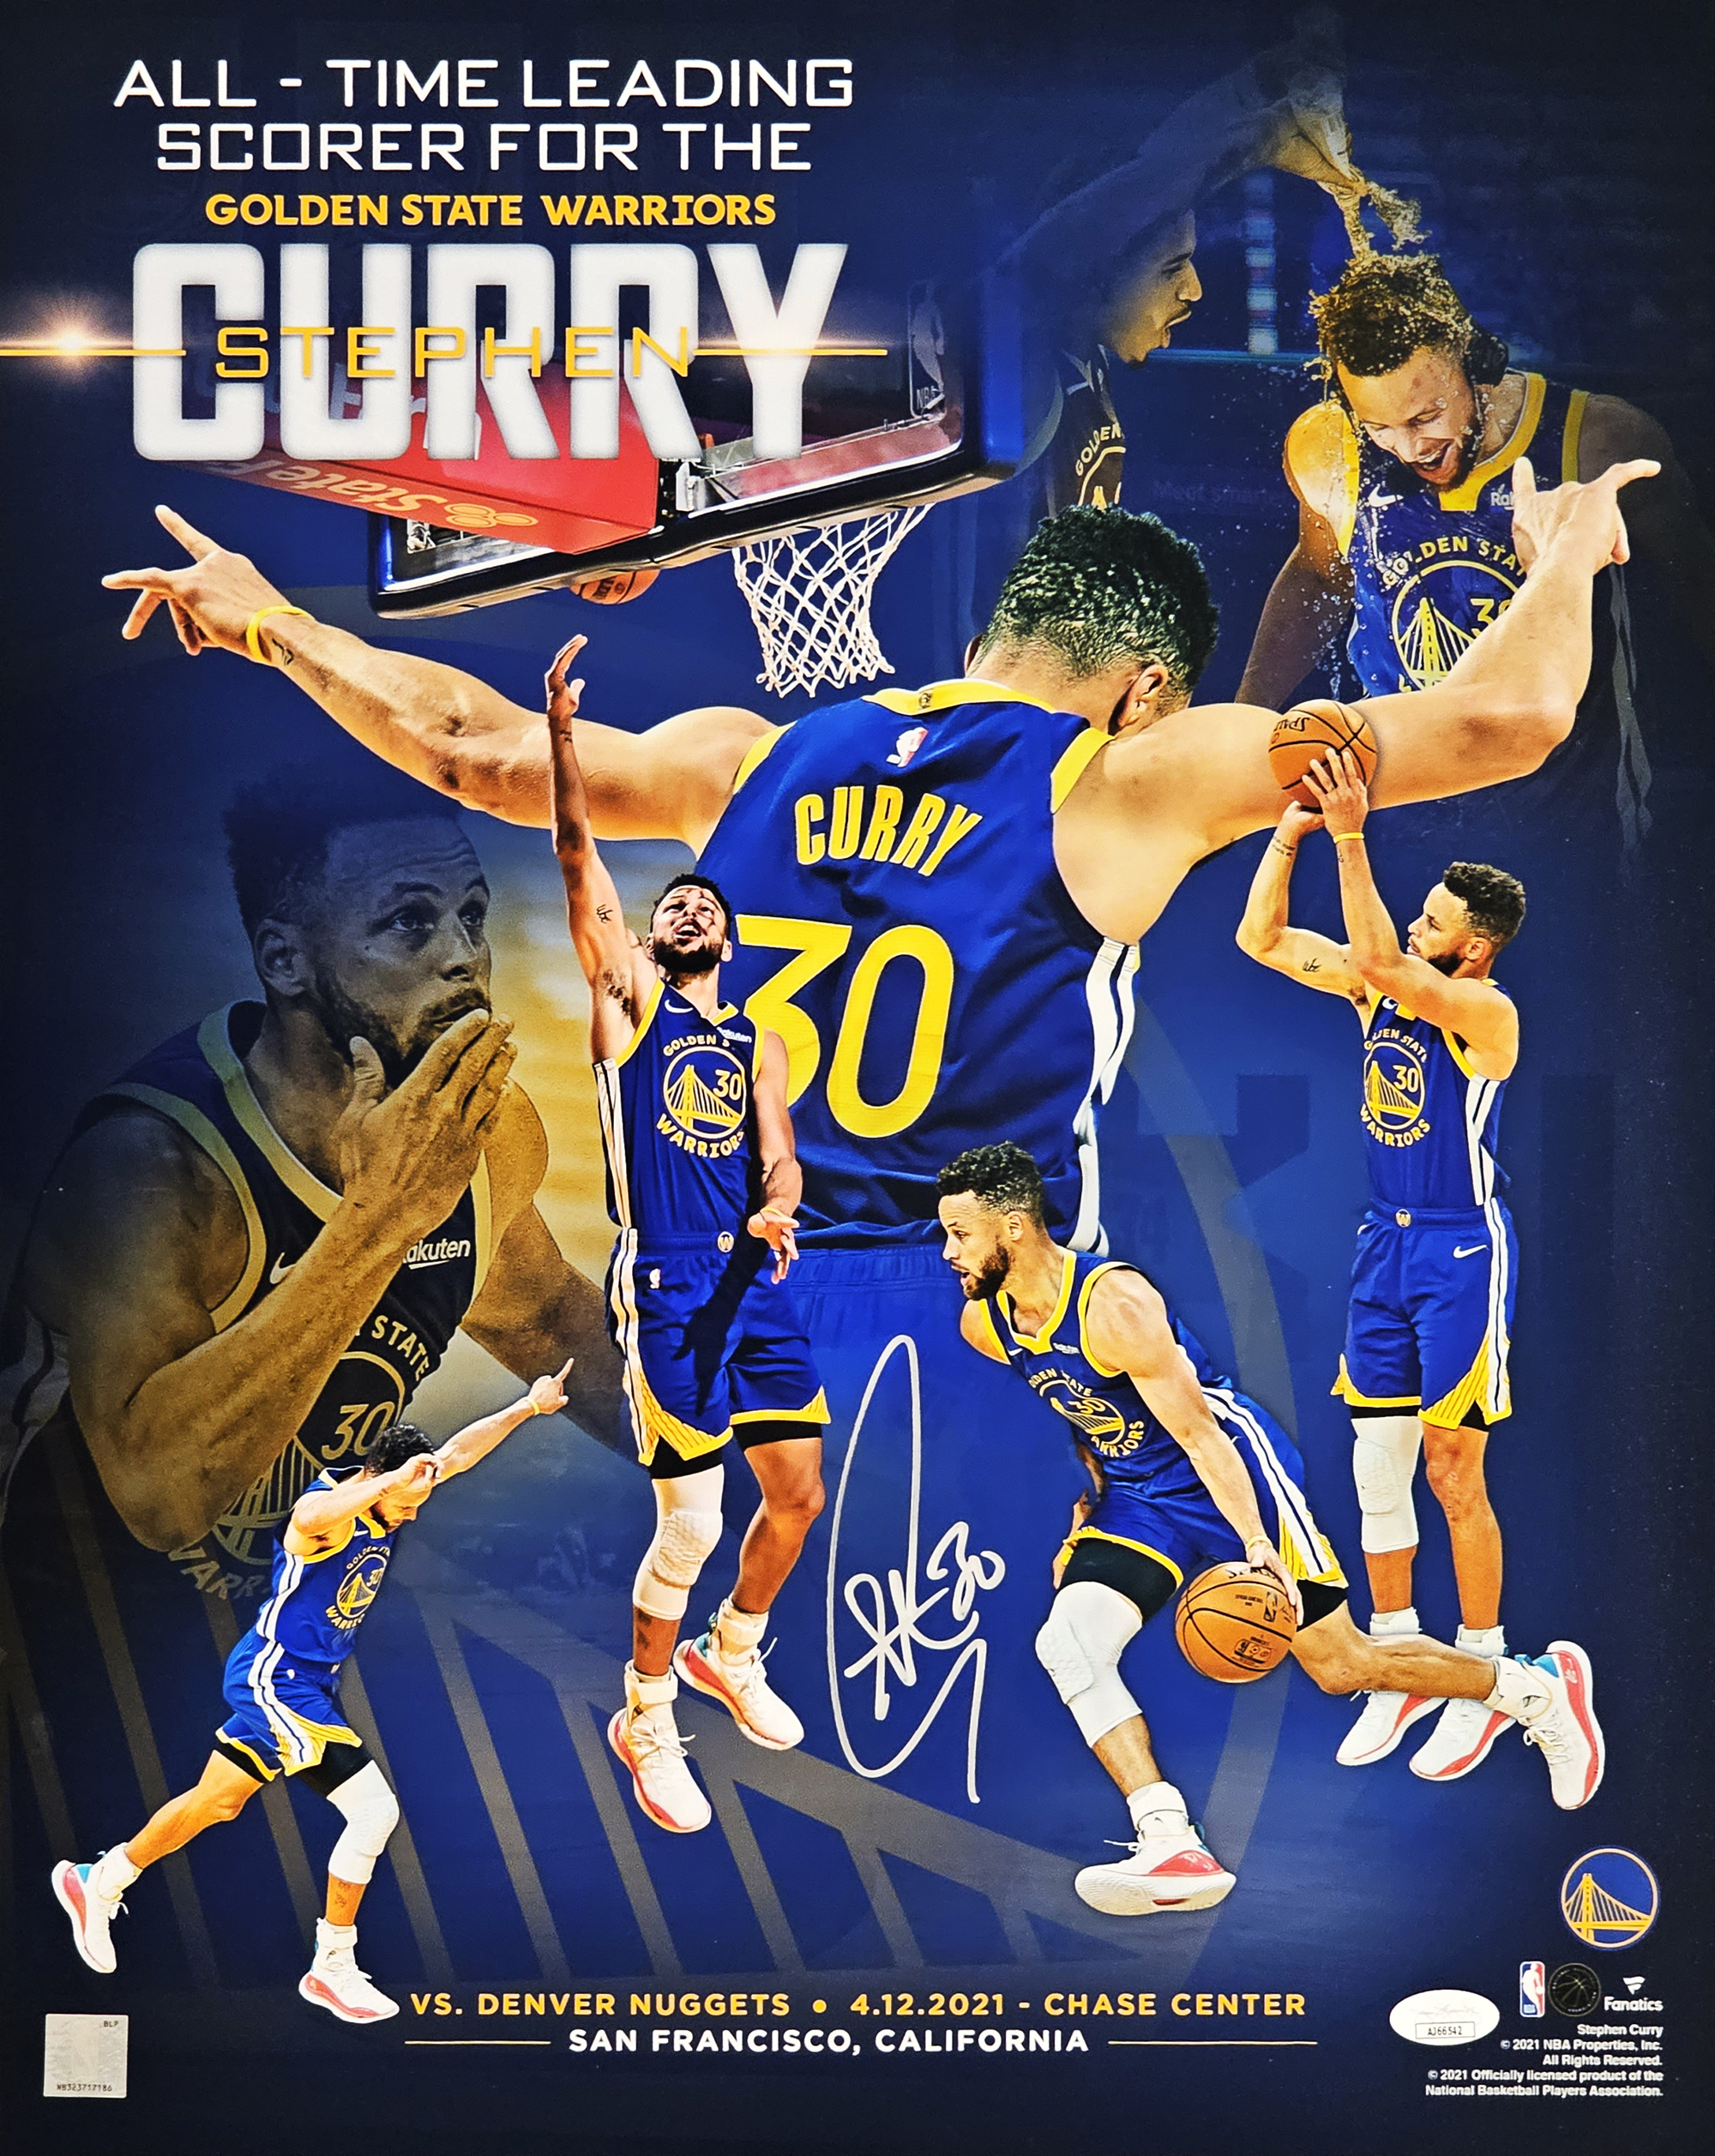 Stephen Curry Golden State Warriors authentic jersey signed with